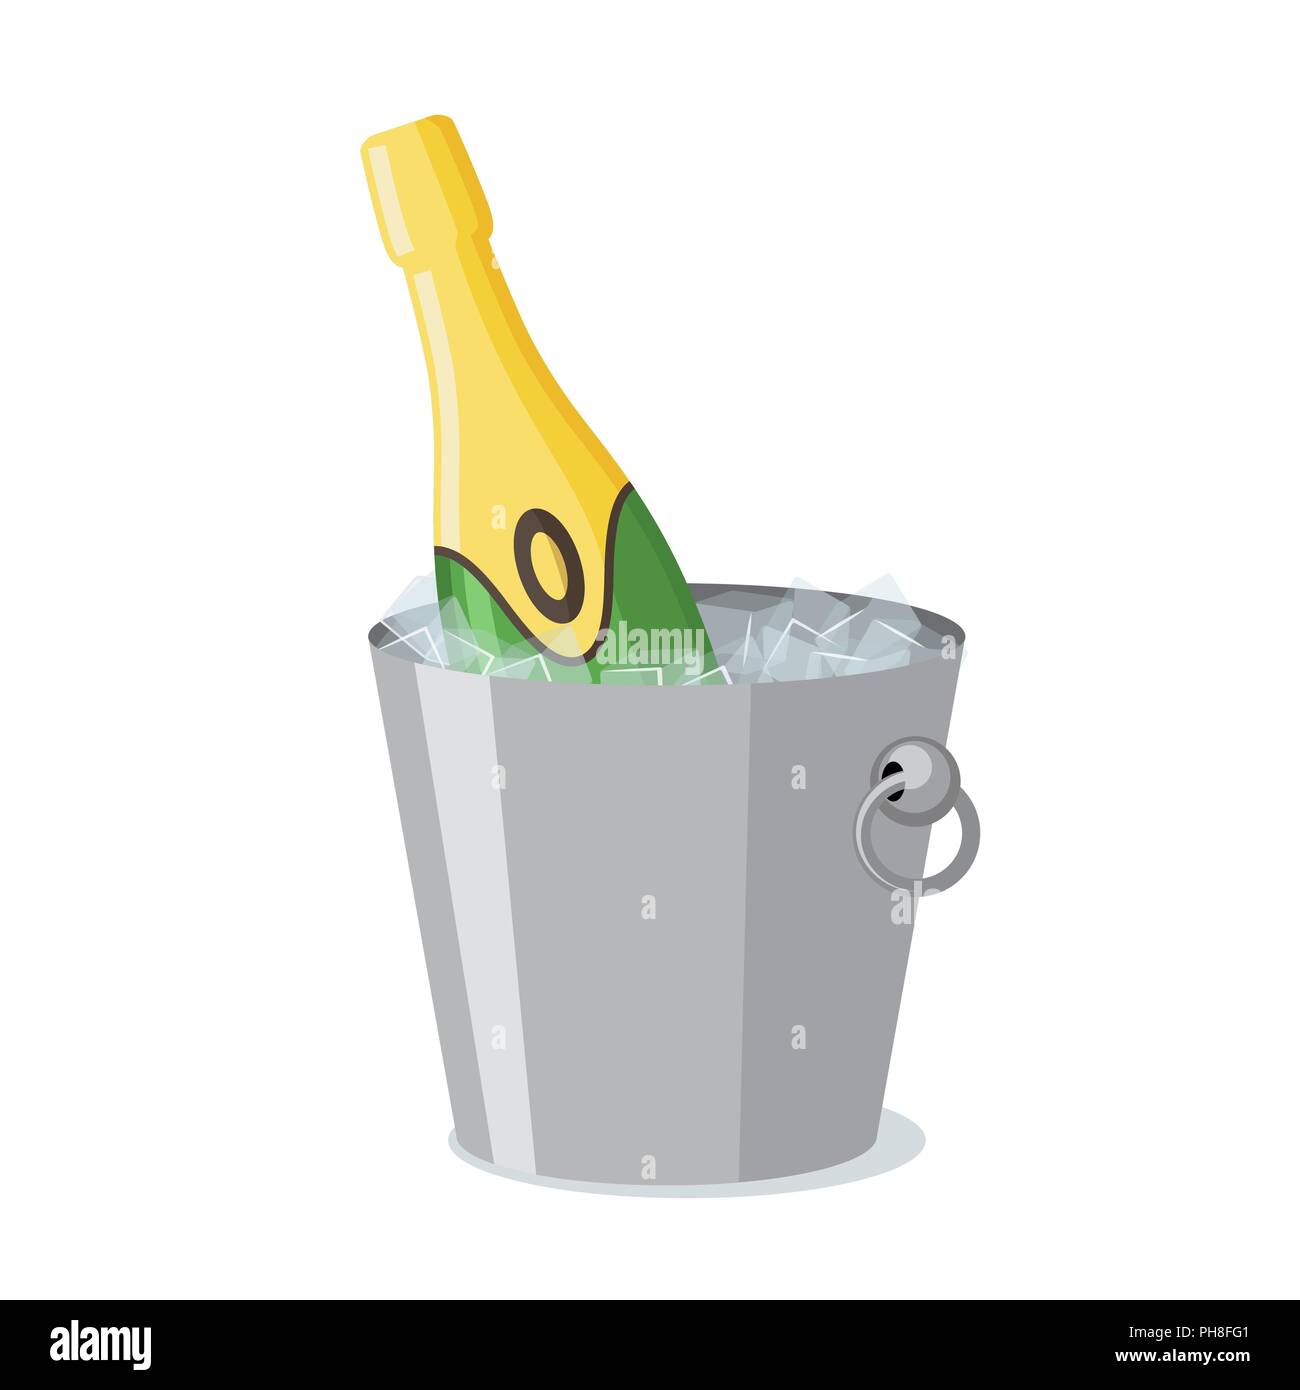 Bottle of champagne in ice bucket icon in flat style. Stock Vector